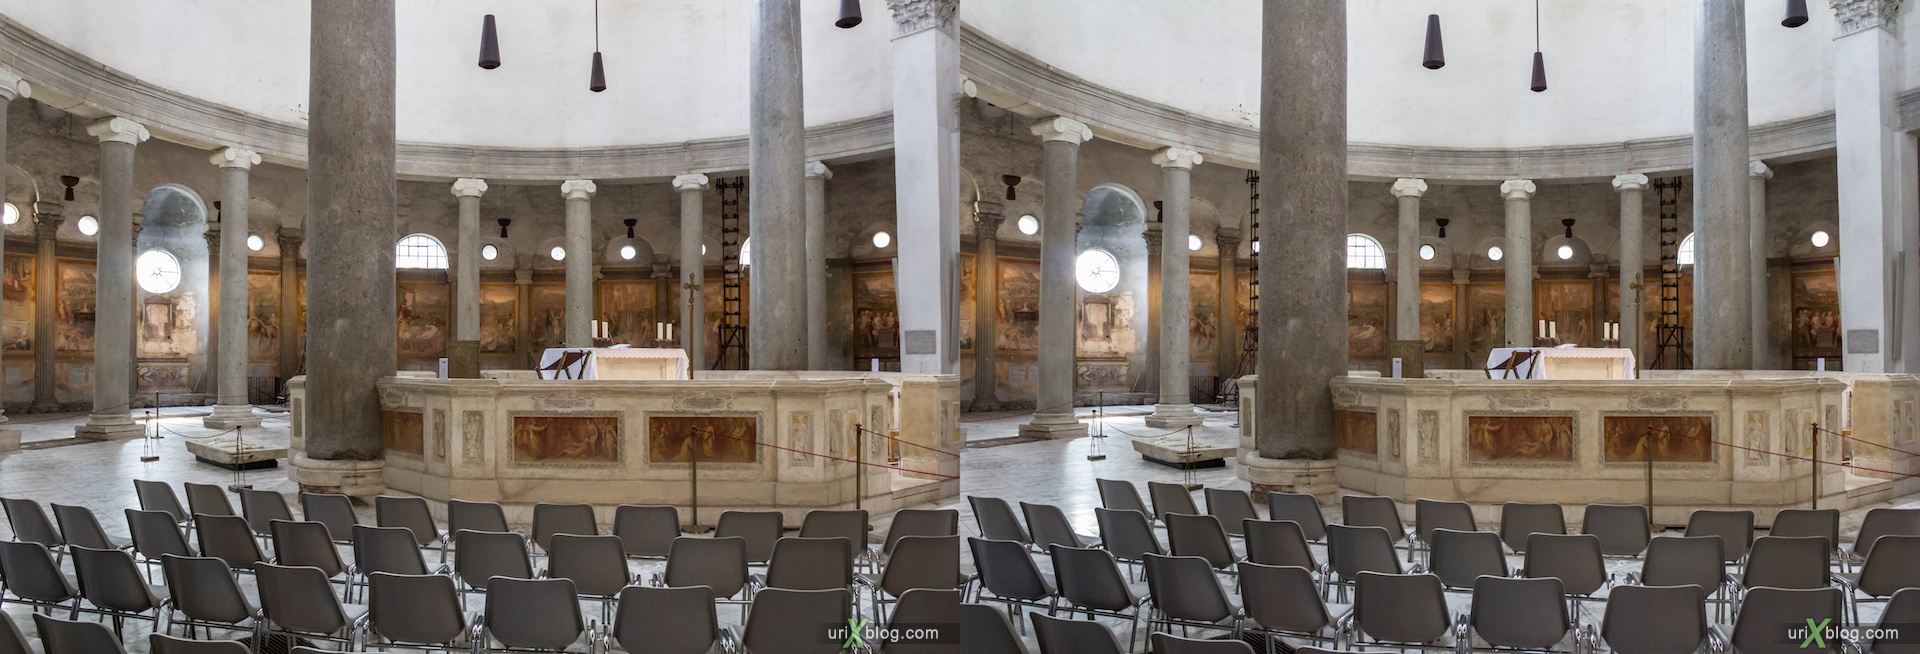 2012, church, Rome, Italy, cathedral, monastery, Christianity, Catholicism, 3D, stereo pair, cross-eyed, crossview, cross view stereo pair